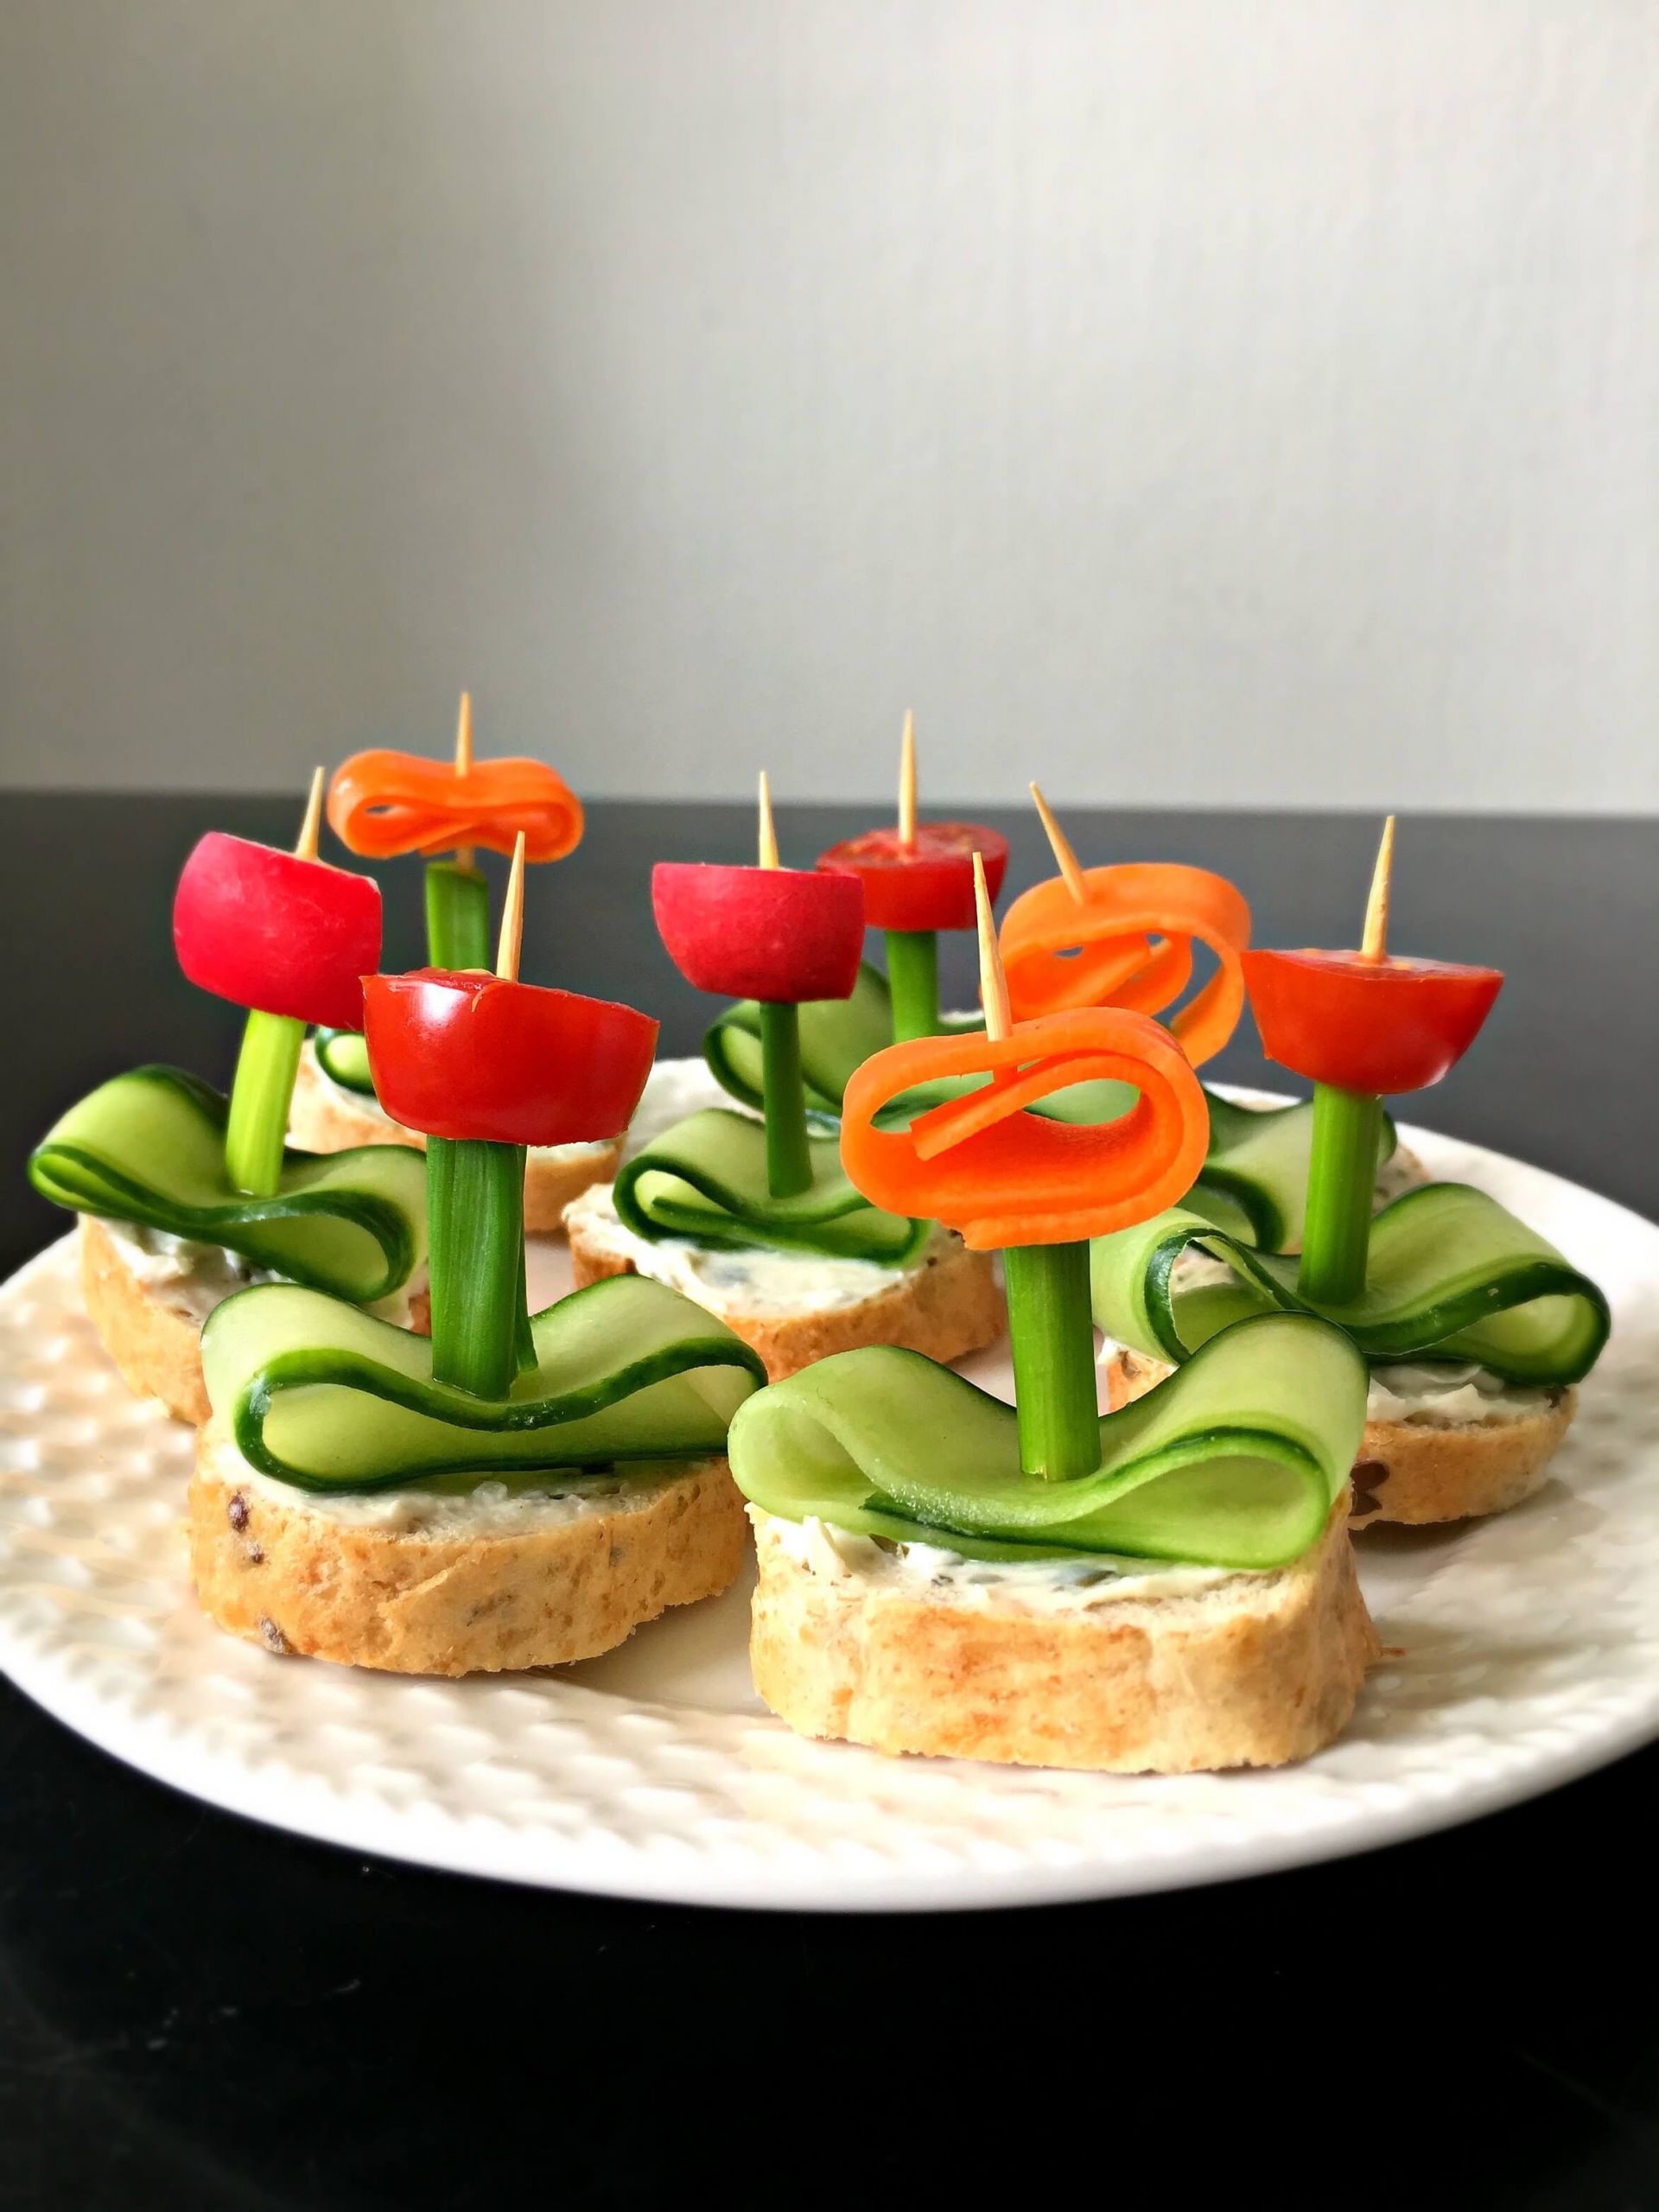 Easy Vegetarian Appetizers Finger Foods
 Vegan Flower Appetizers with Herb "Cream Cheese"